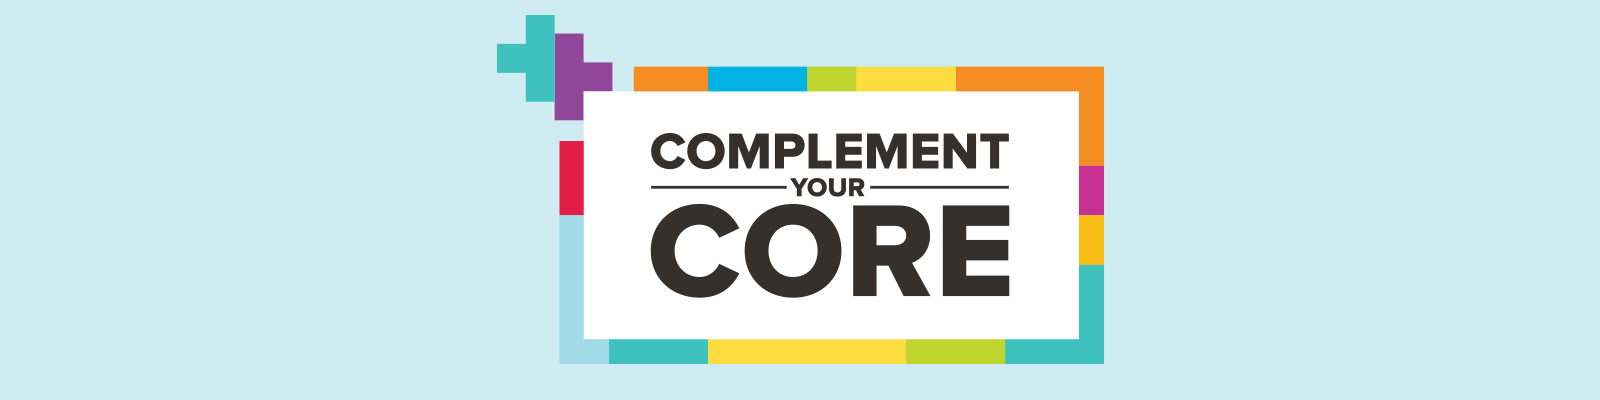 Complement Your Core